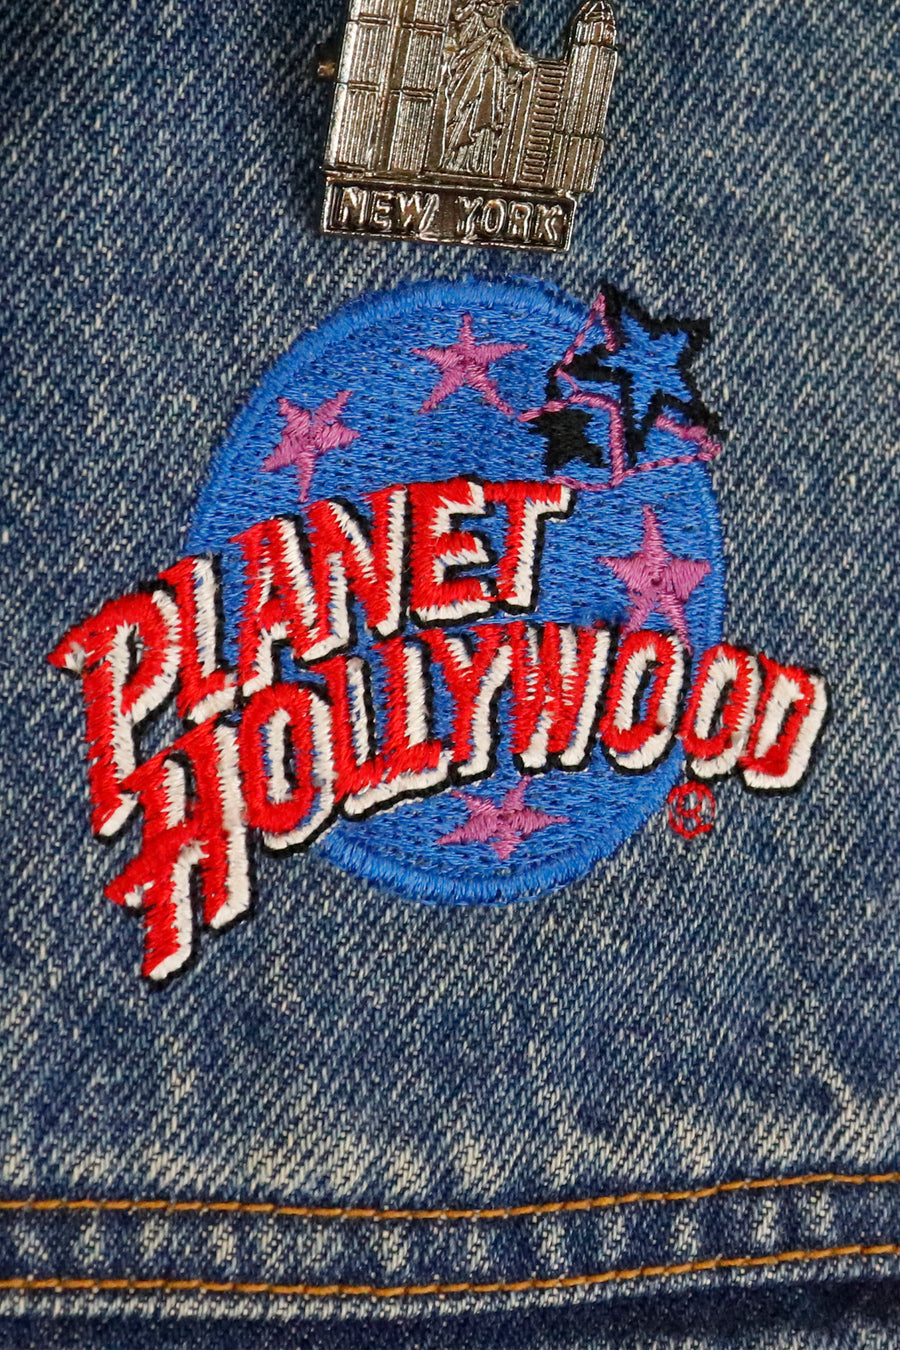 Vintage Planet Hollywood New York Embroidered Denim Jacket With Metal Pin Outerwear Sz S